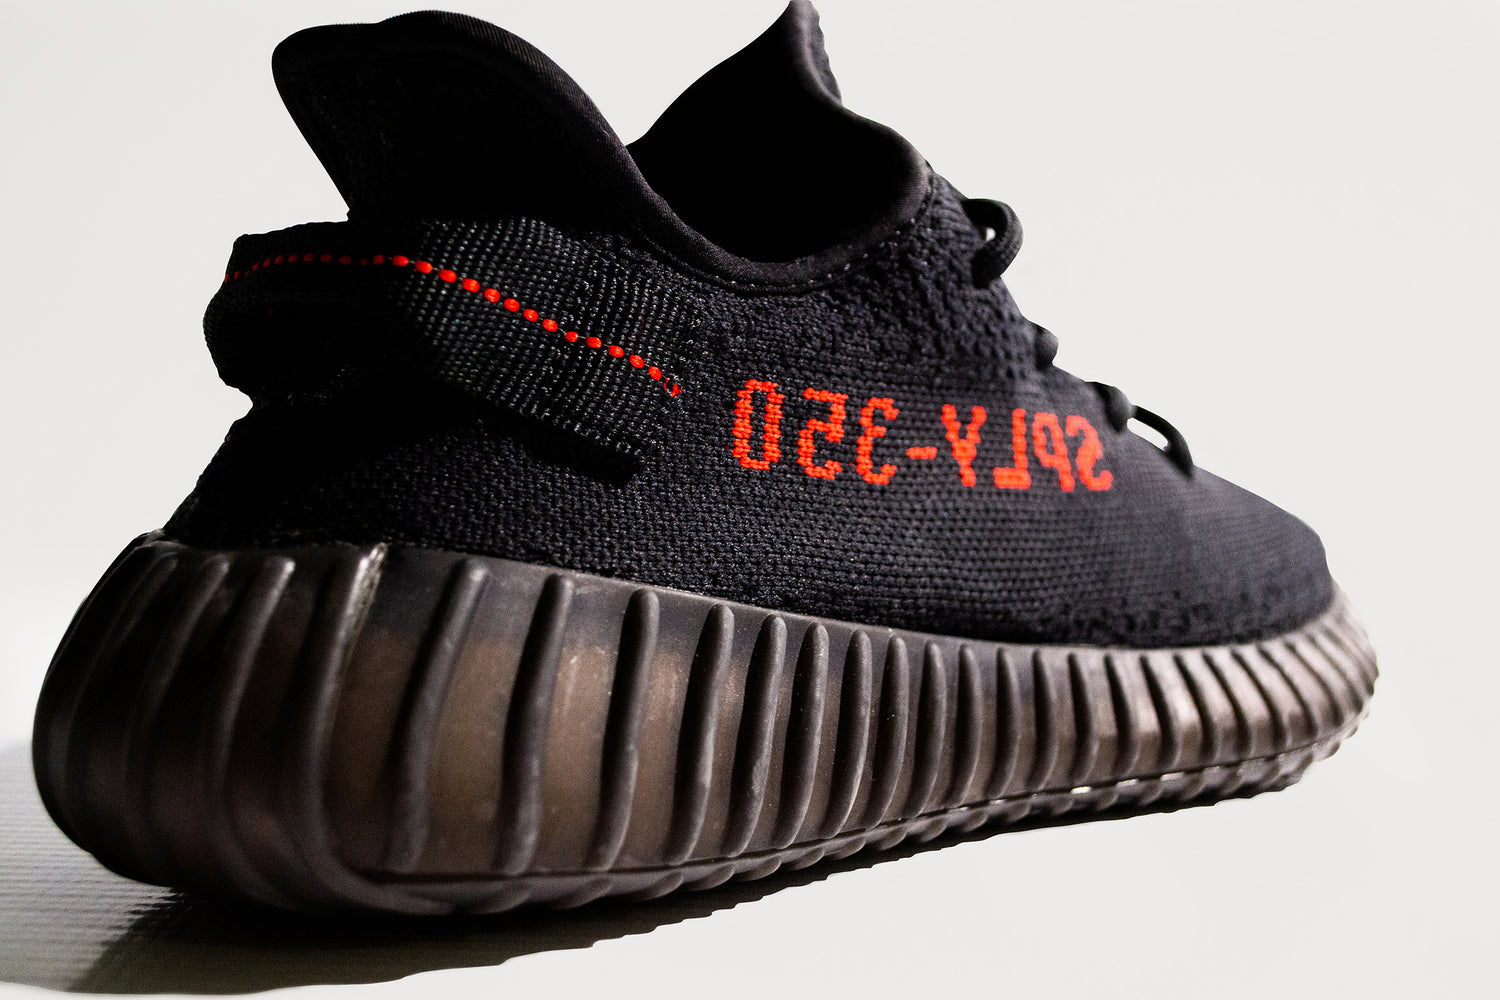 How To Lace Your Sneakers / Lace Swap : ADIDAS Yeezy Boost 350 V2